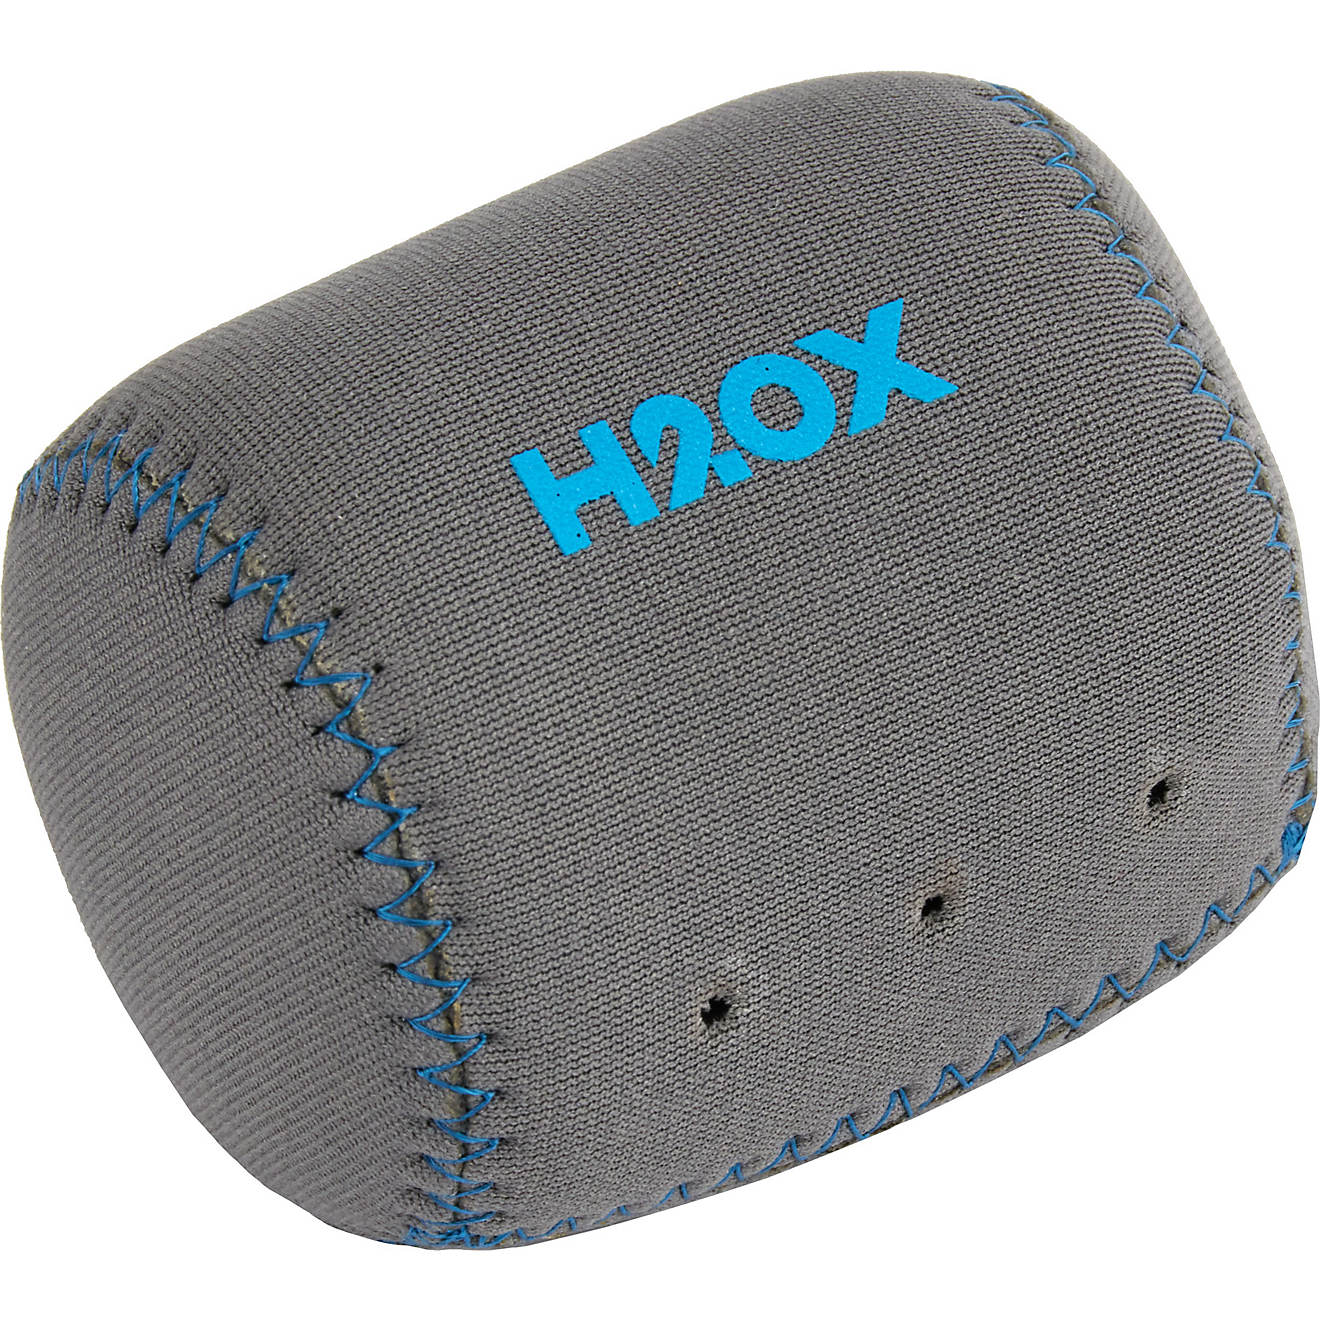 H2OX Neoprene Bait Cast Reel Cover                                                                                               - view number 1